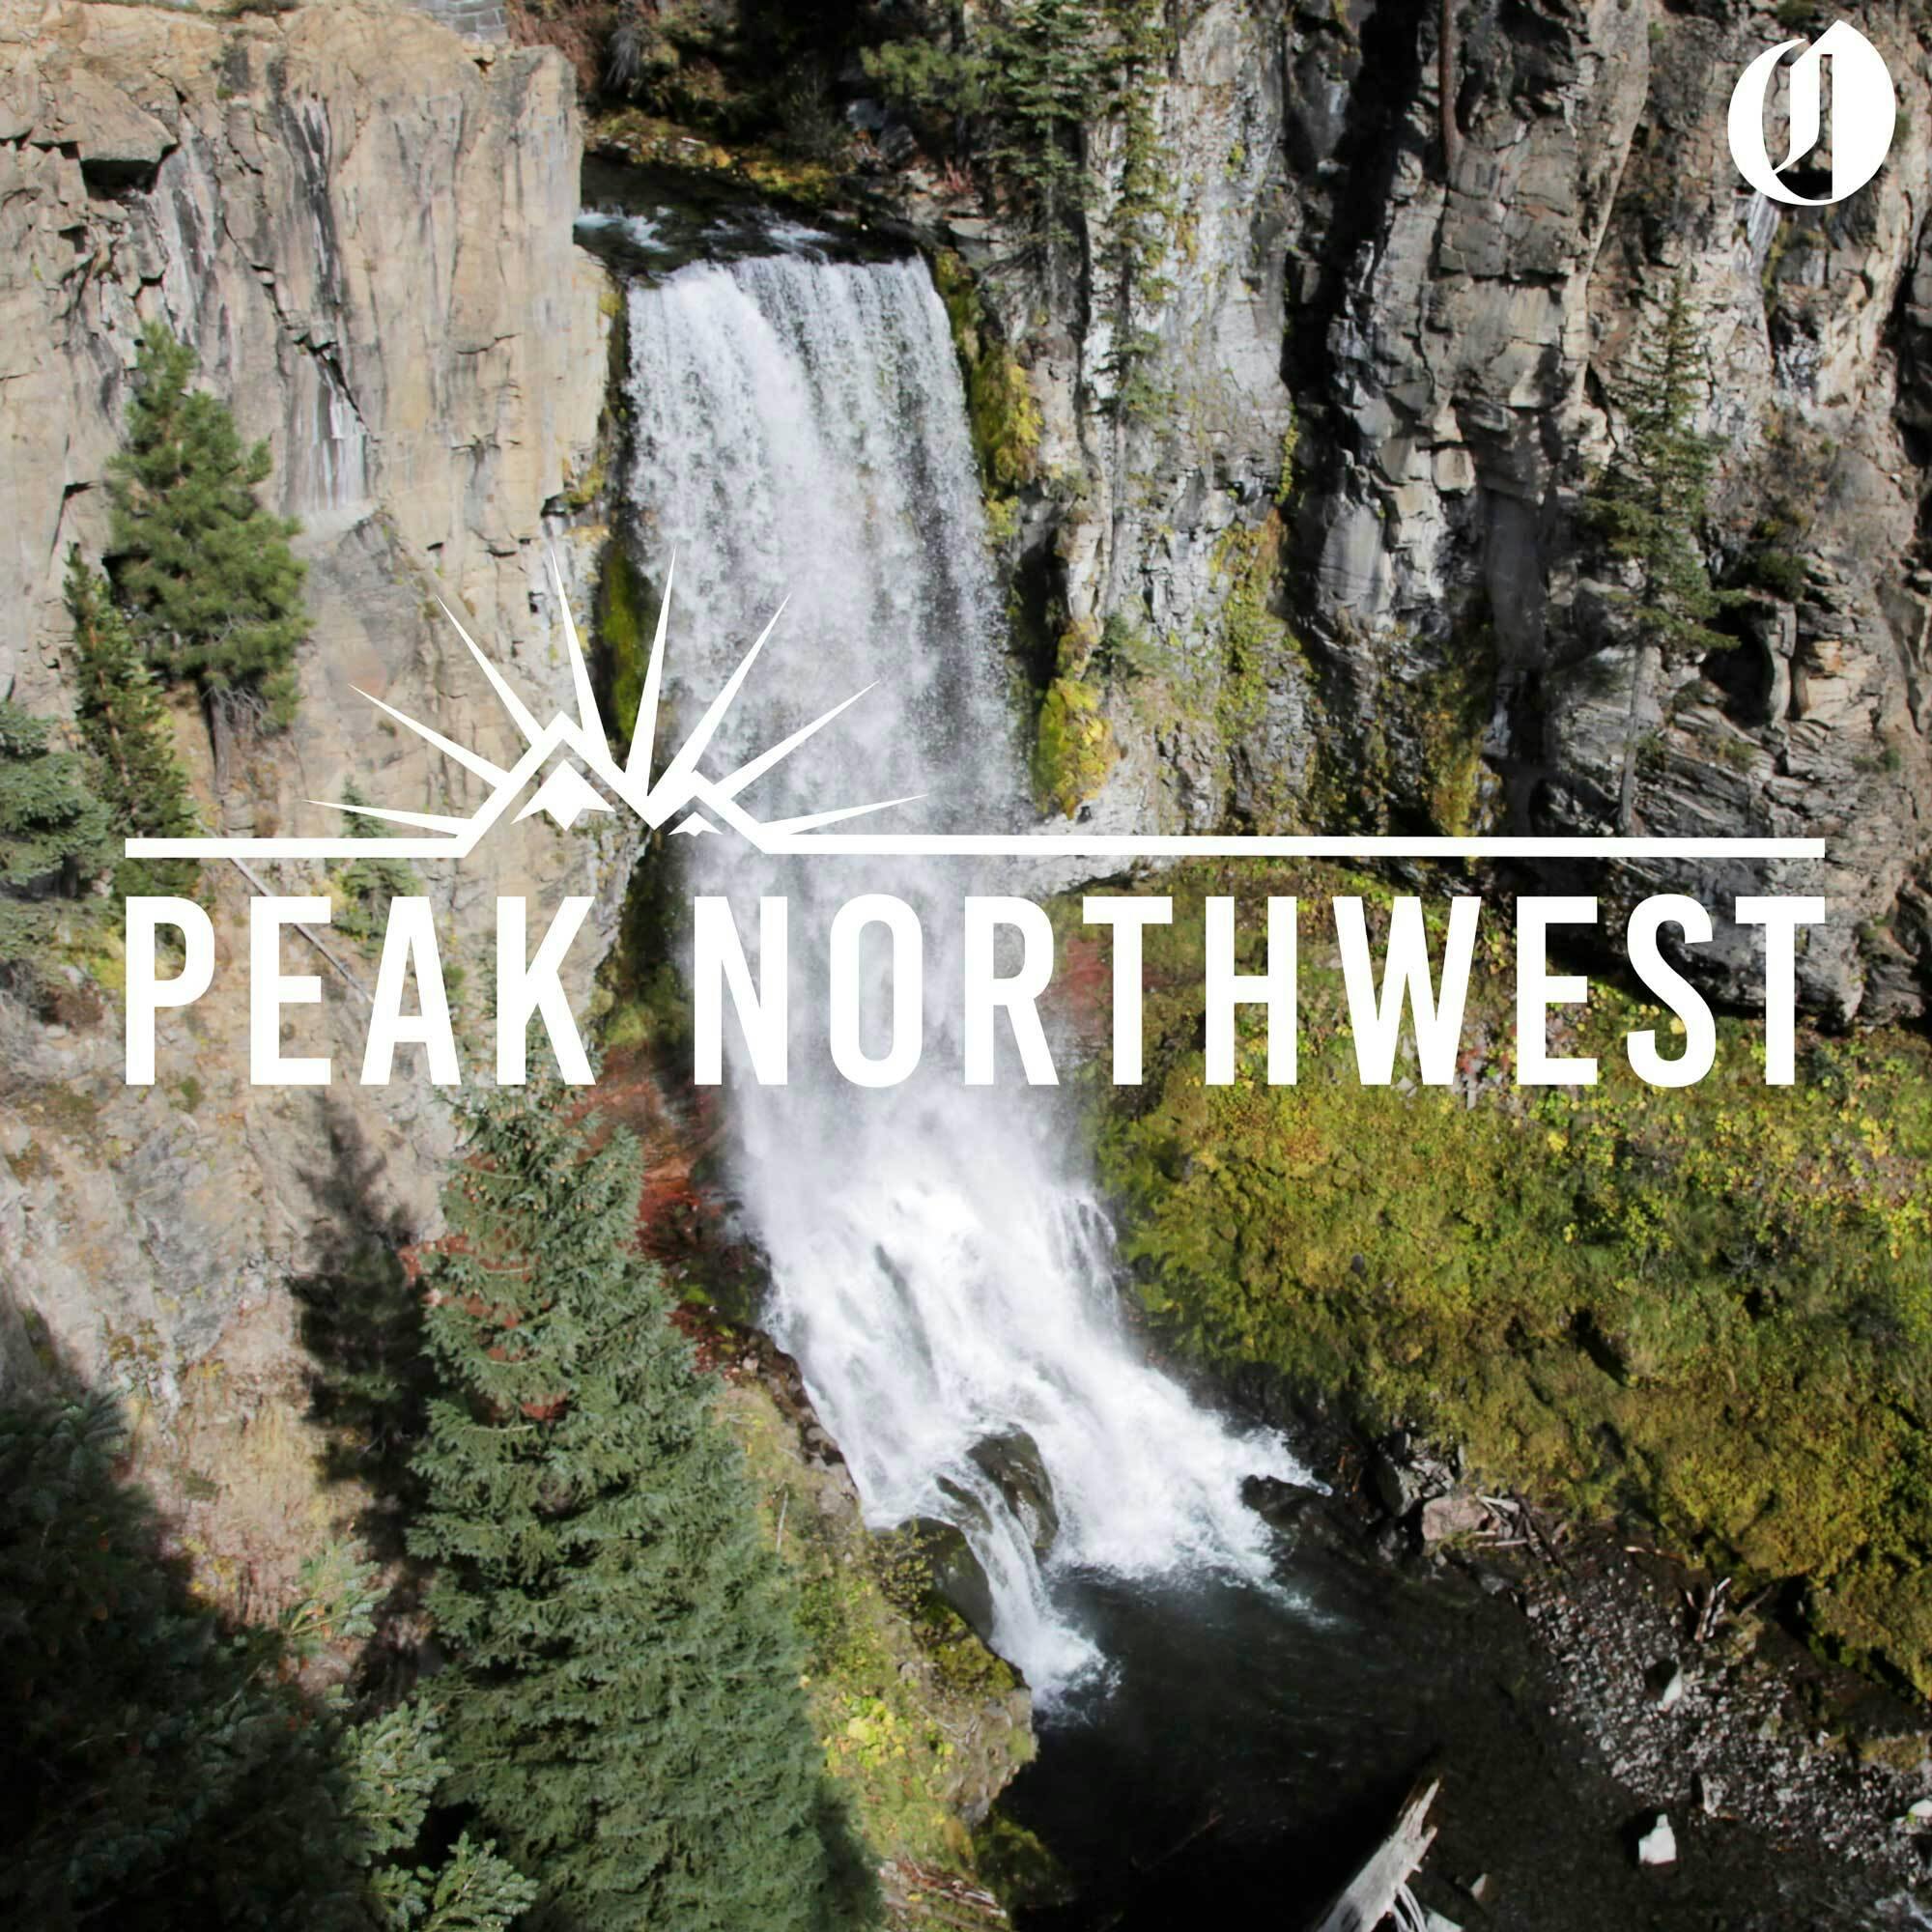 Why Tumalo Falls is one of the best waterfall hikes in Oregon